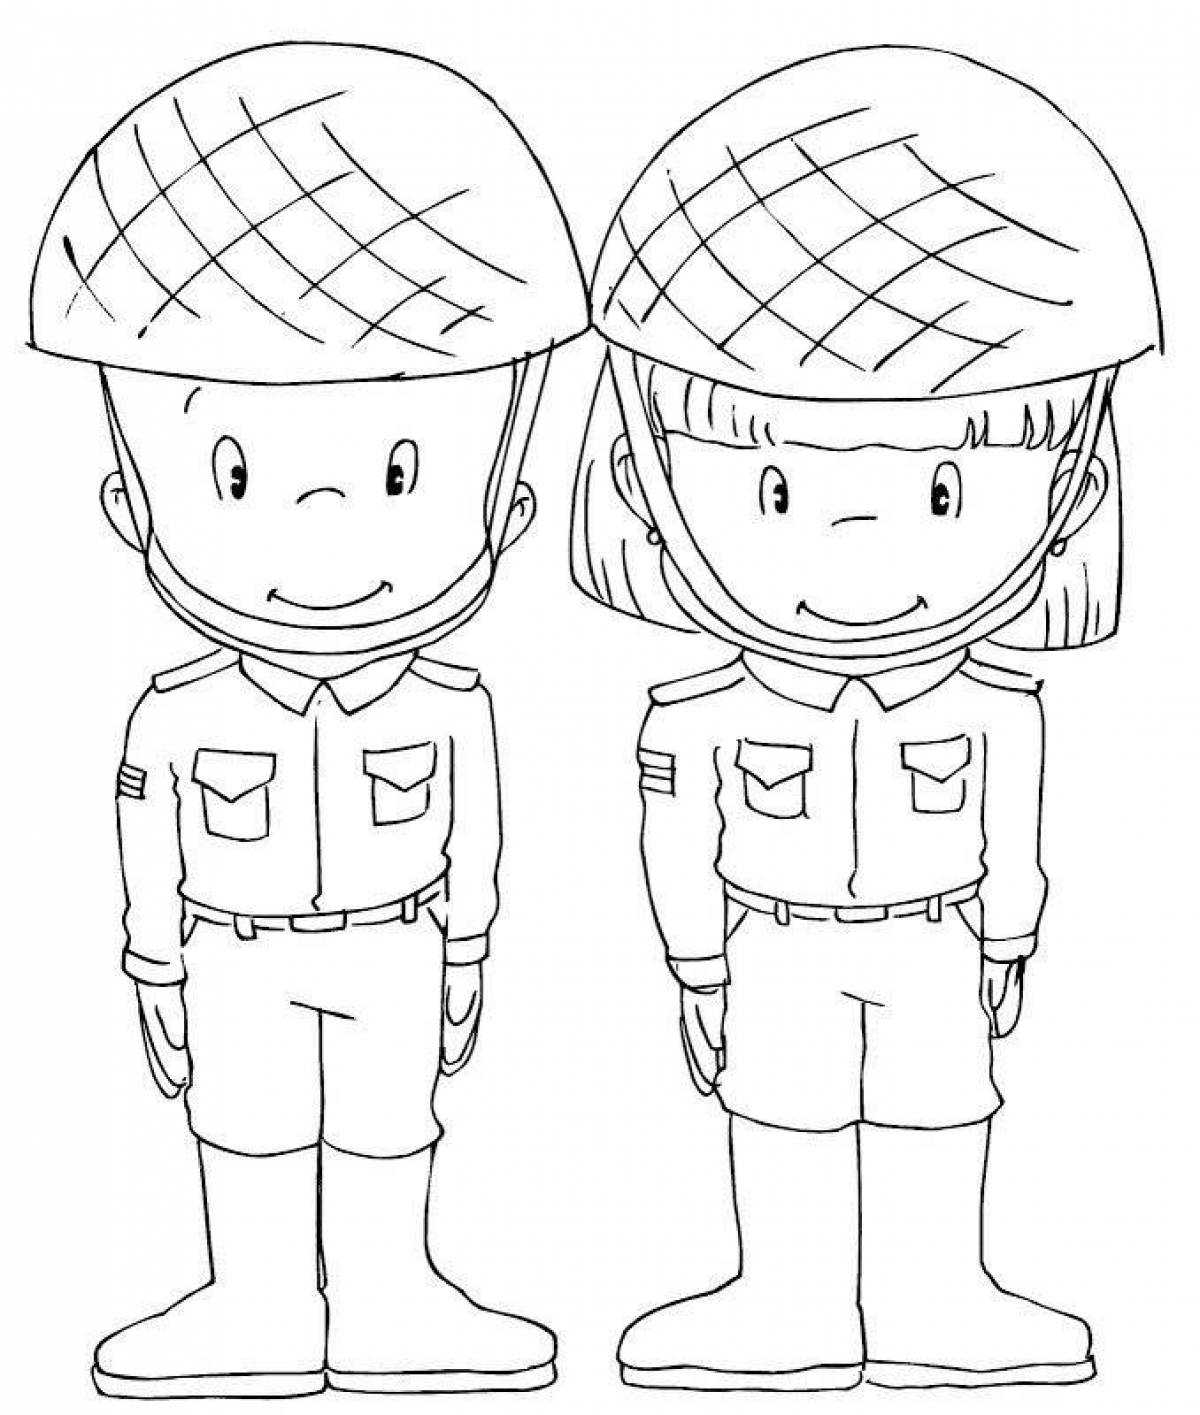 Colouring merry soldier for kids